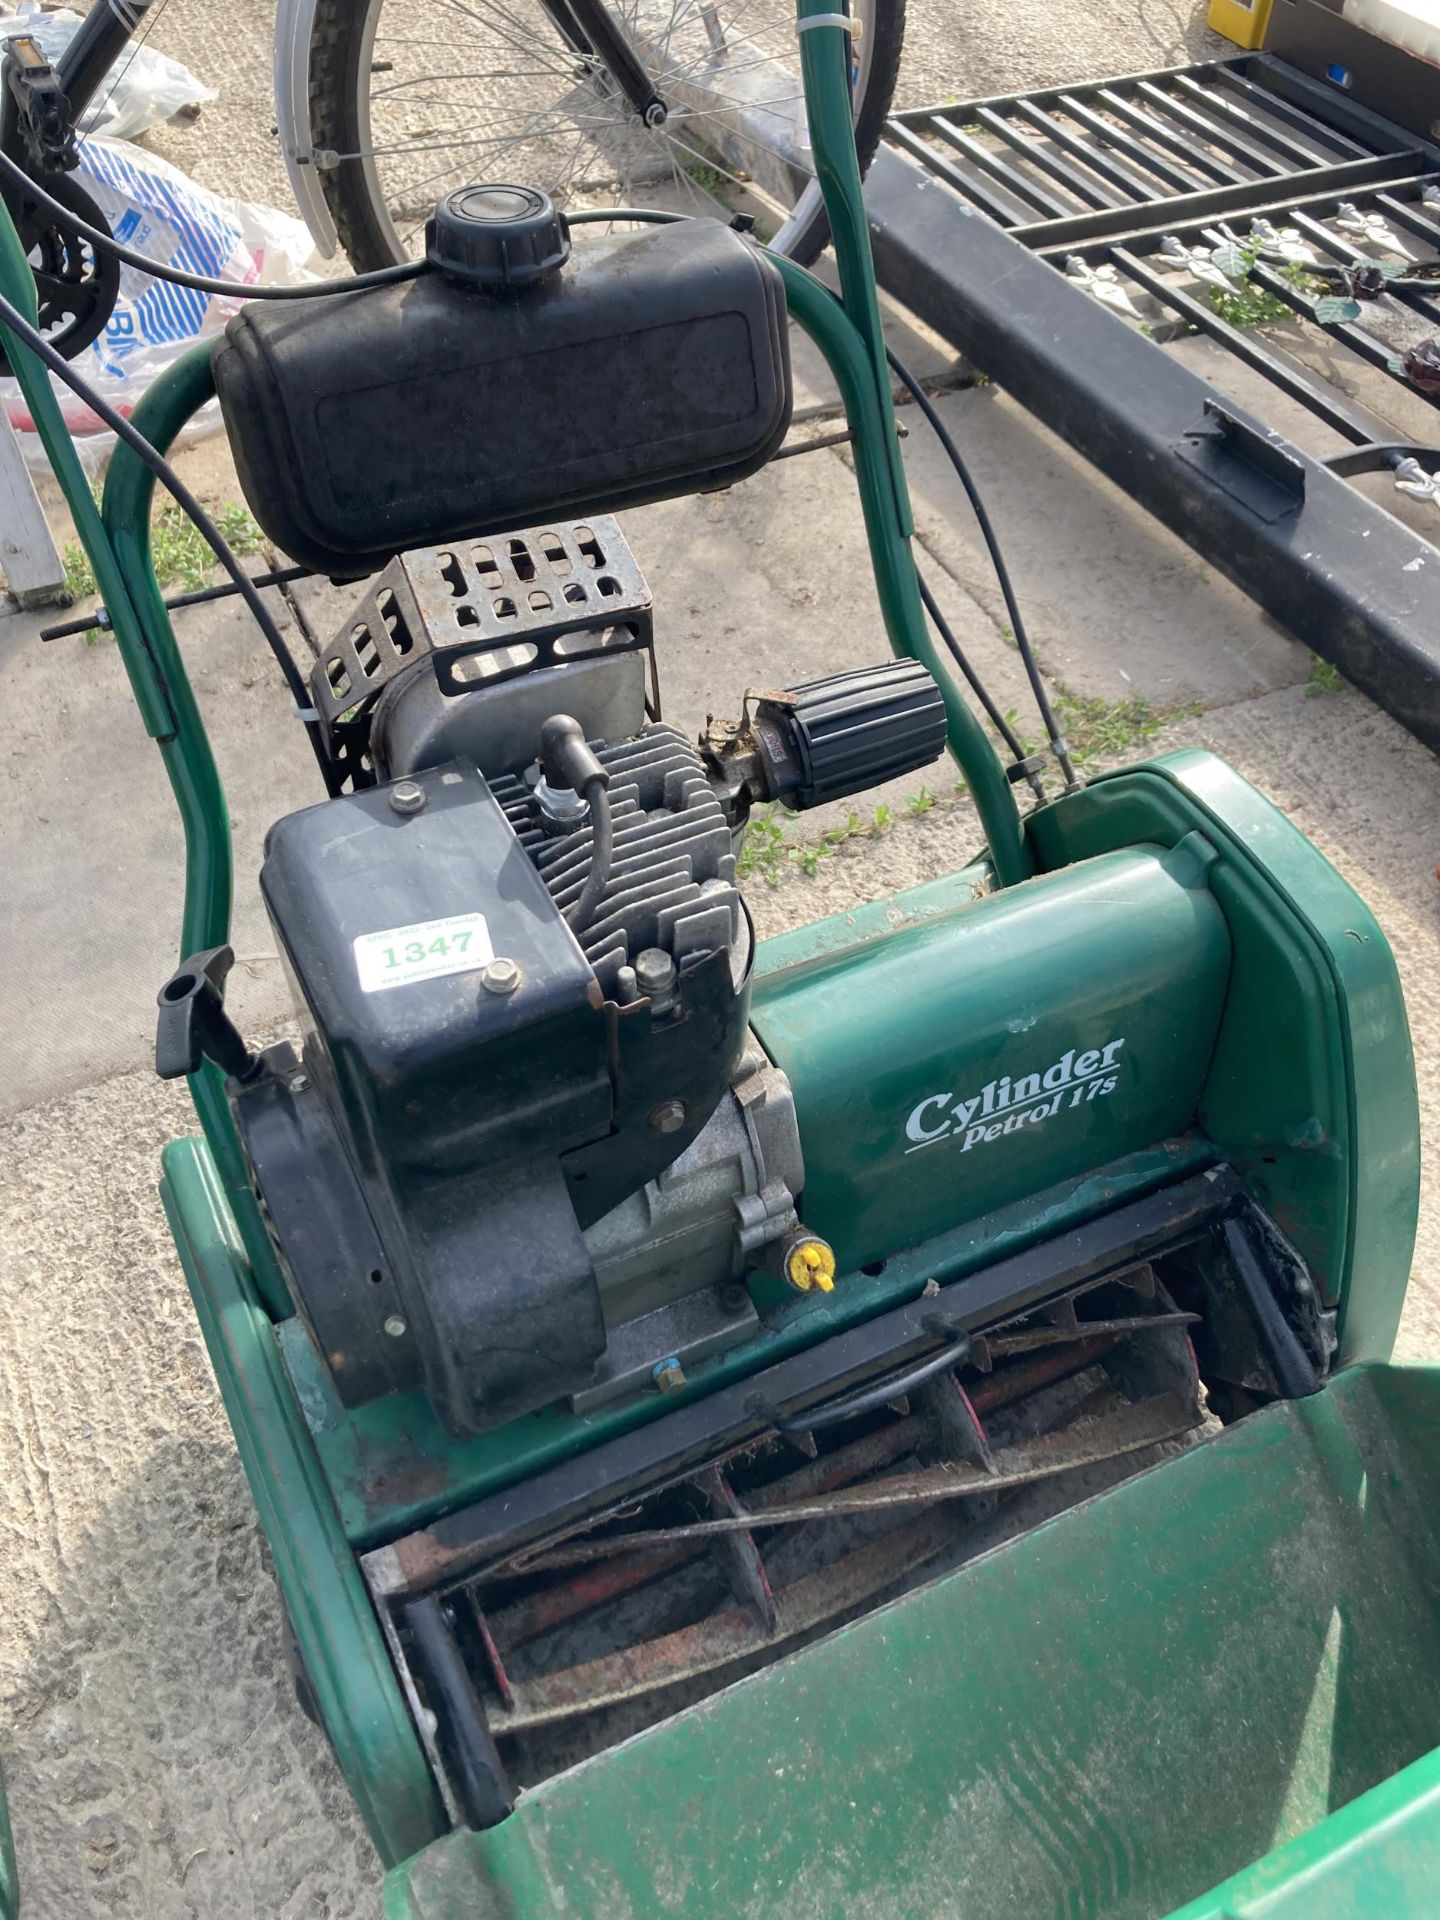 QUALCAST 17"SELF PROPELLED CYLINDER MOWER WITH GRASS BOX NO VAT - Image 2 of 3